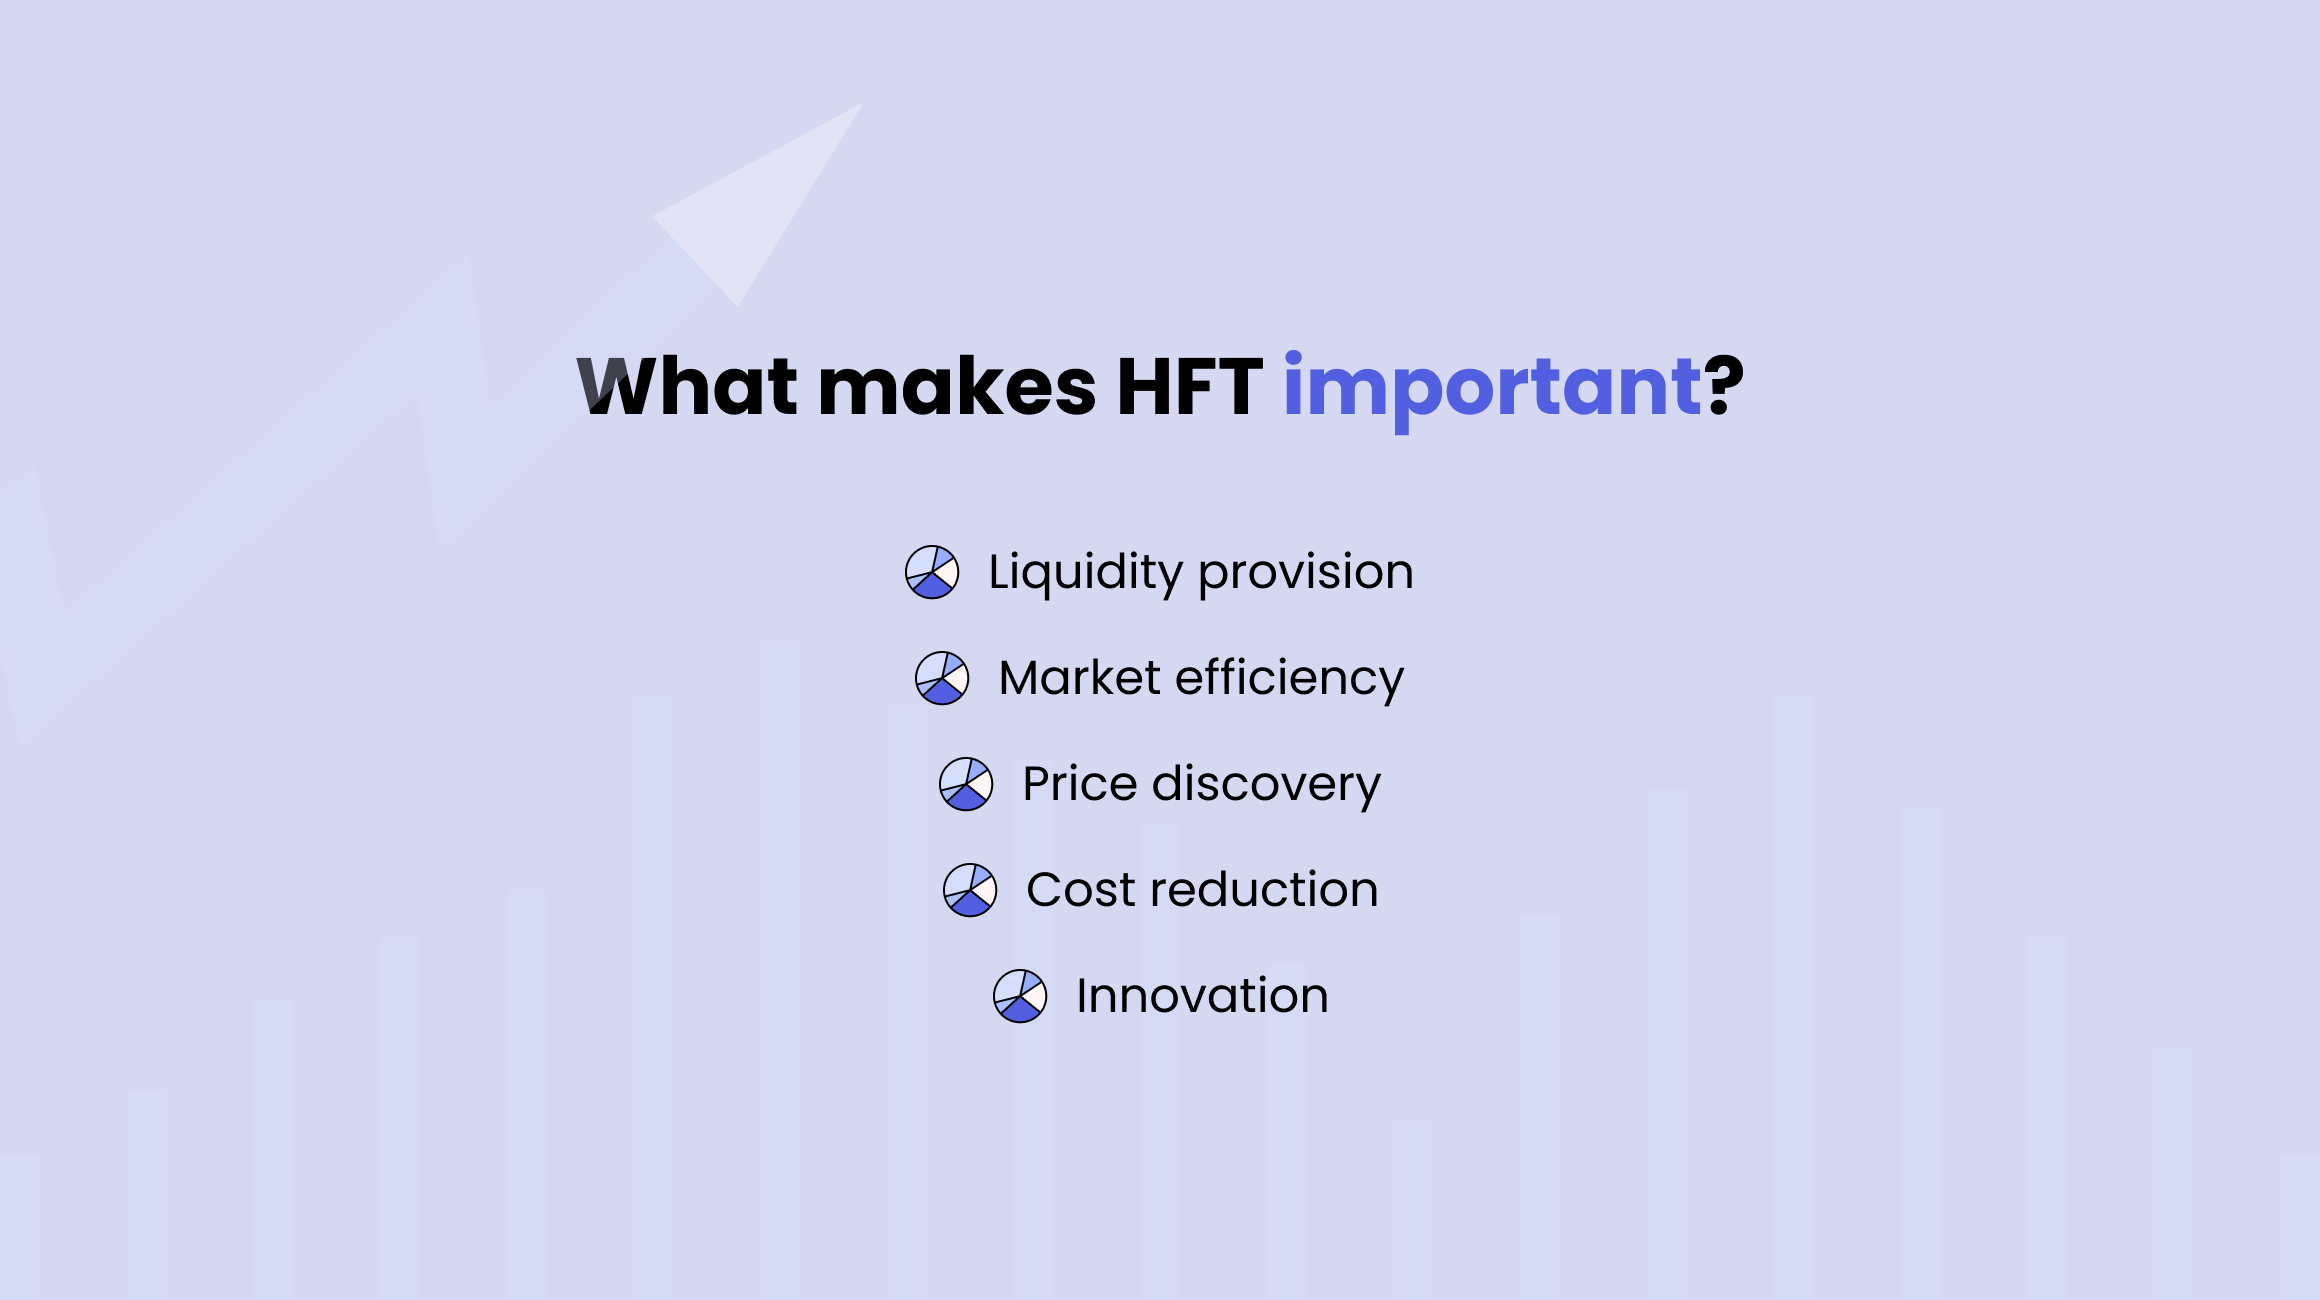 What makes HFT important